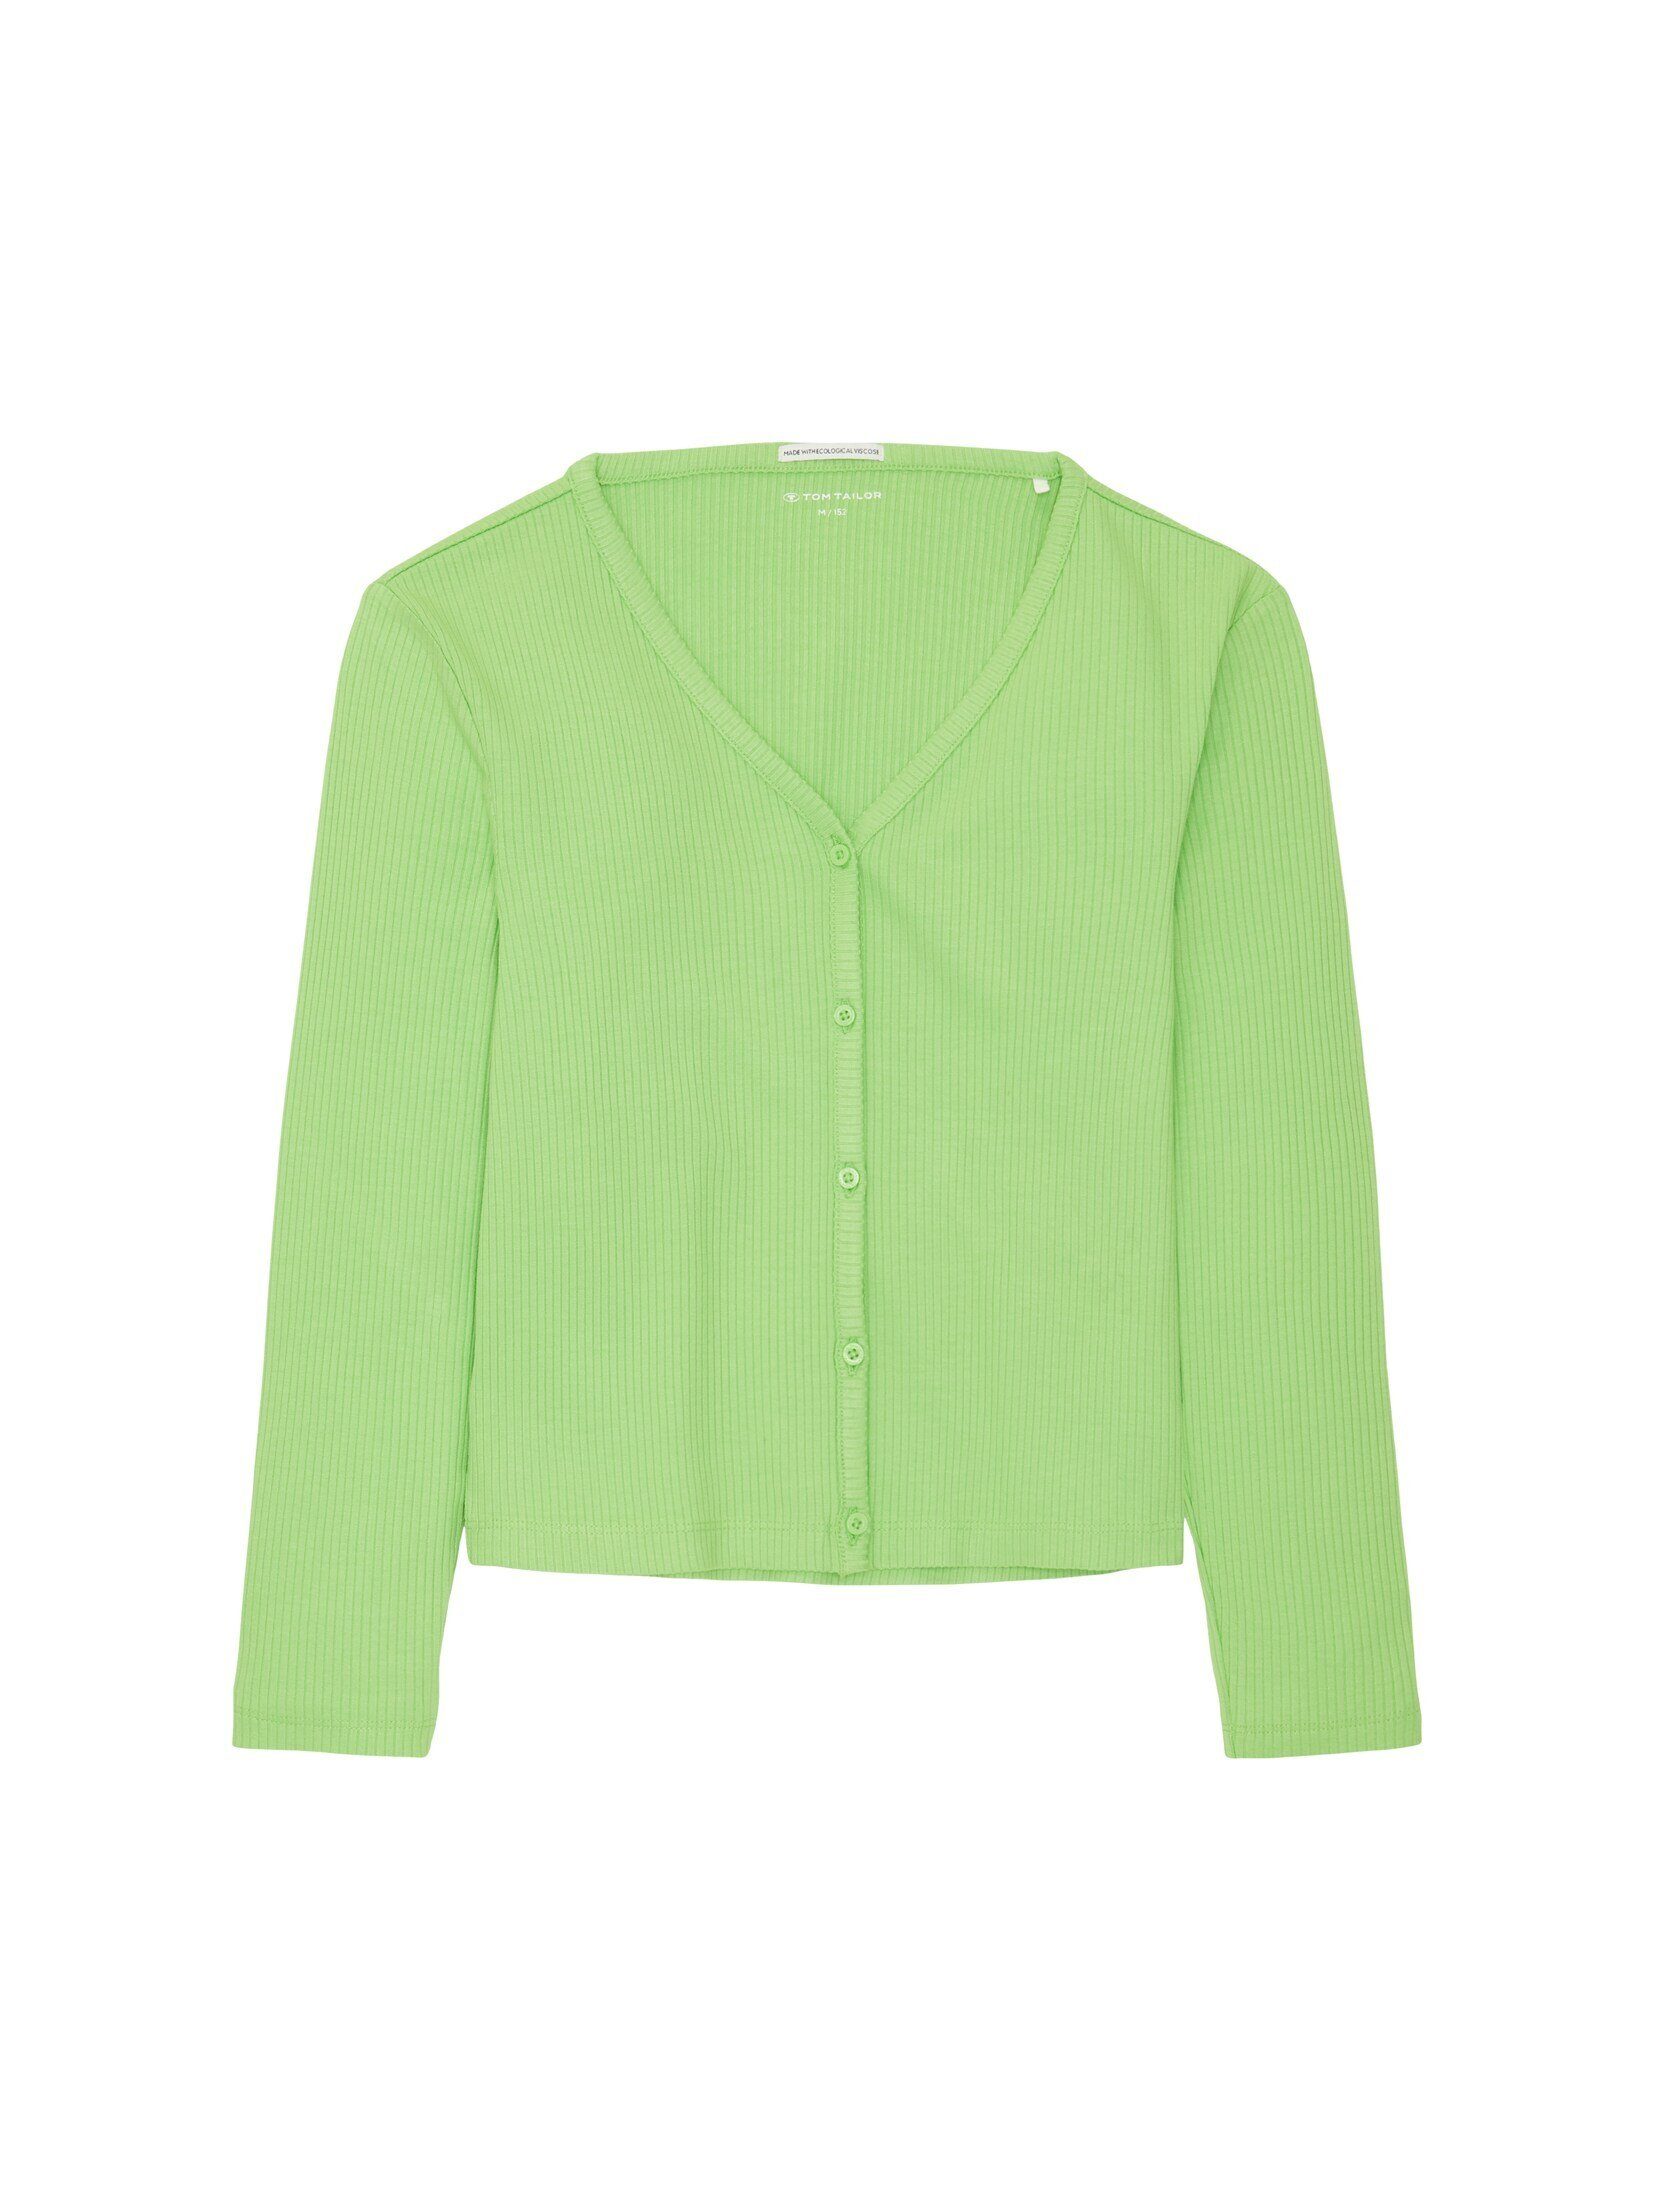 TOM TAILOR green Rippjacke lime Cropped liquid T-Shirt